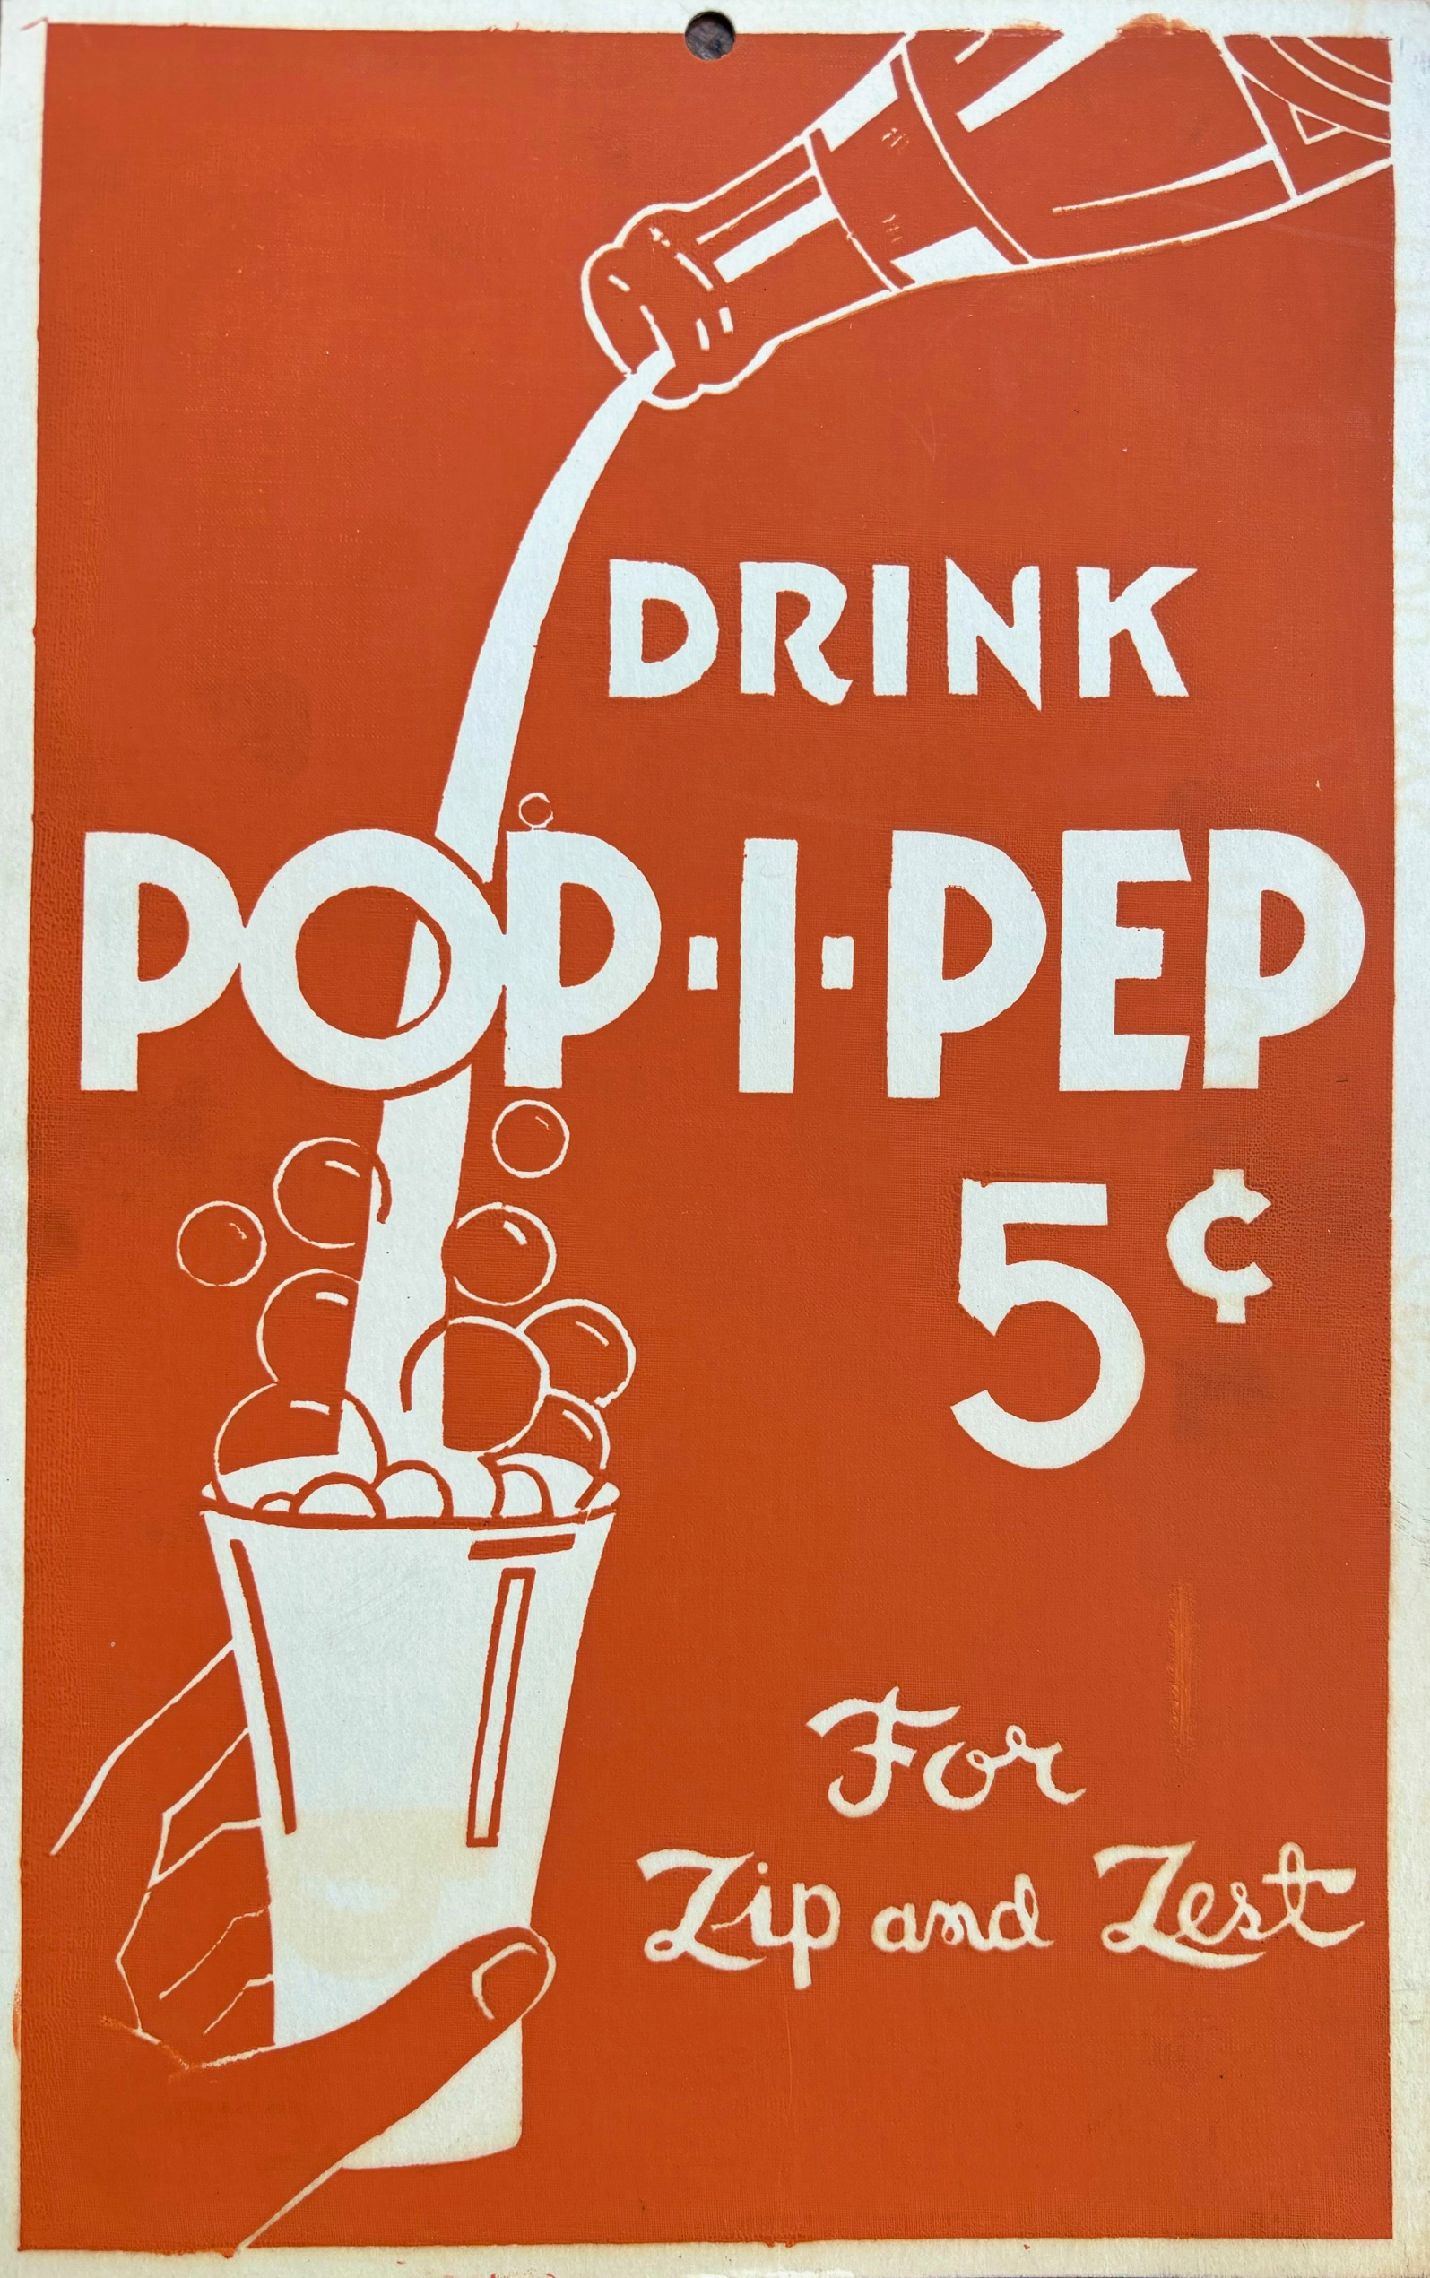 (*NEW ARRIVAL*) (Soda) Drink Pop-I-Pep 5 c for Zip and Zest